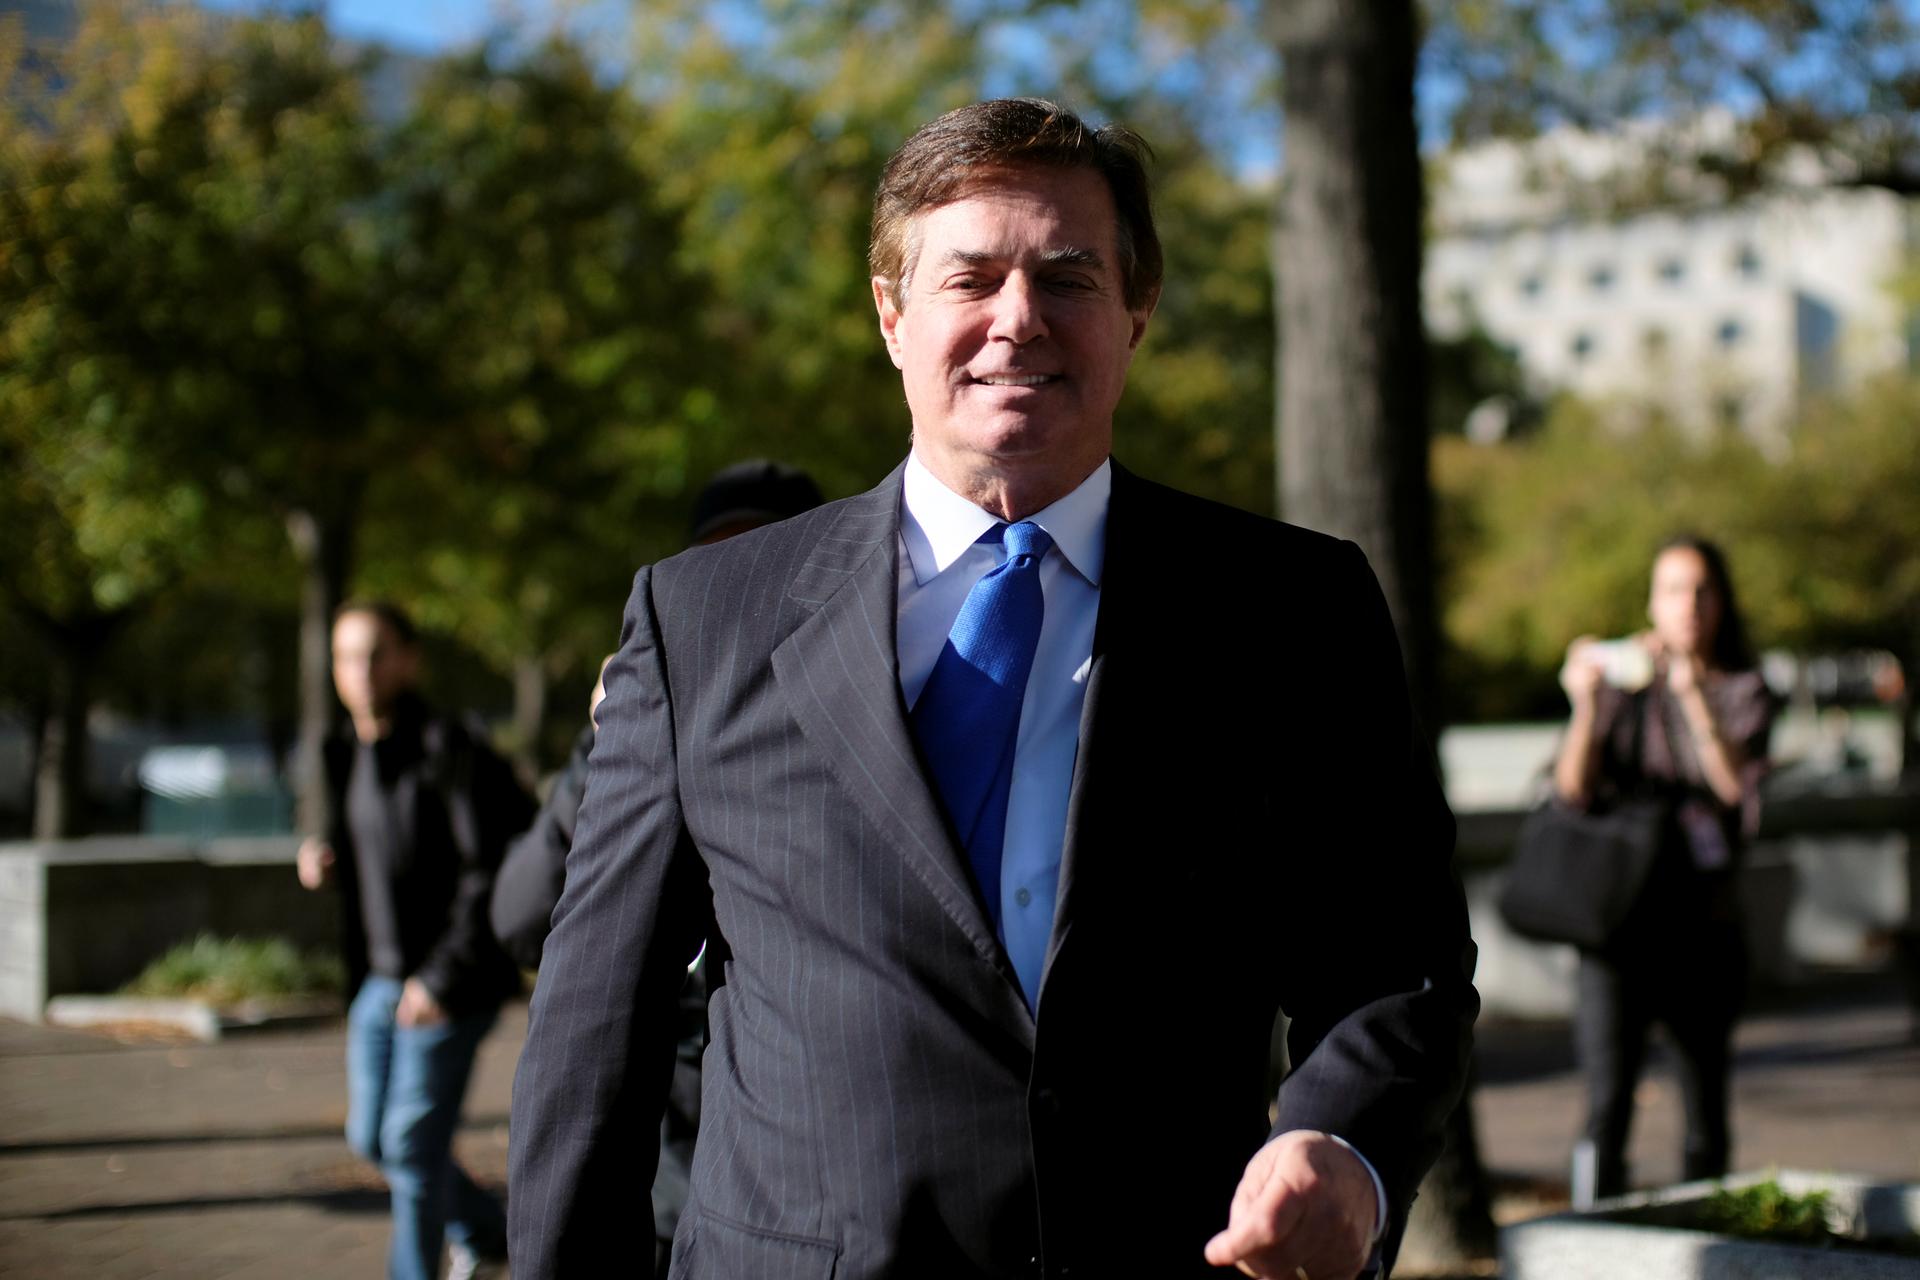 Former Trump 2016 campaign chairman Paul Manafort leaves U.S. Federal Court, after being arraigned on twelve federal charges